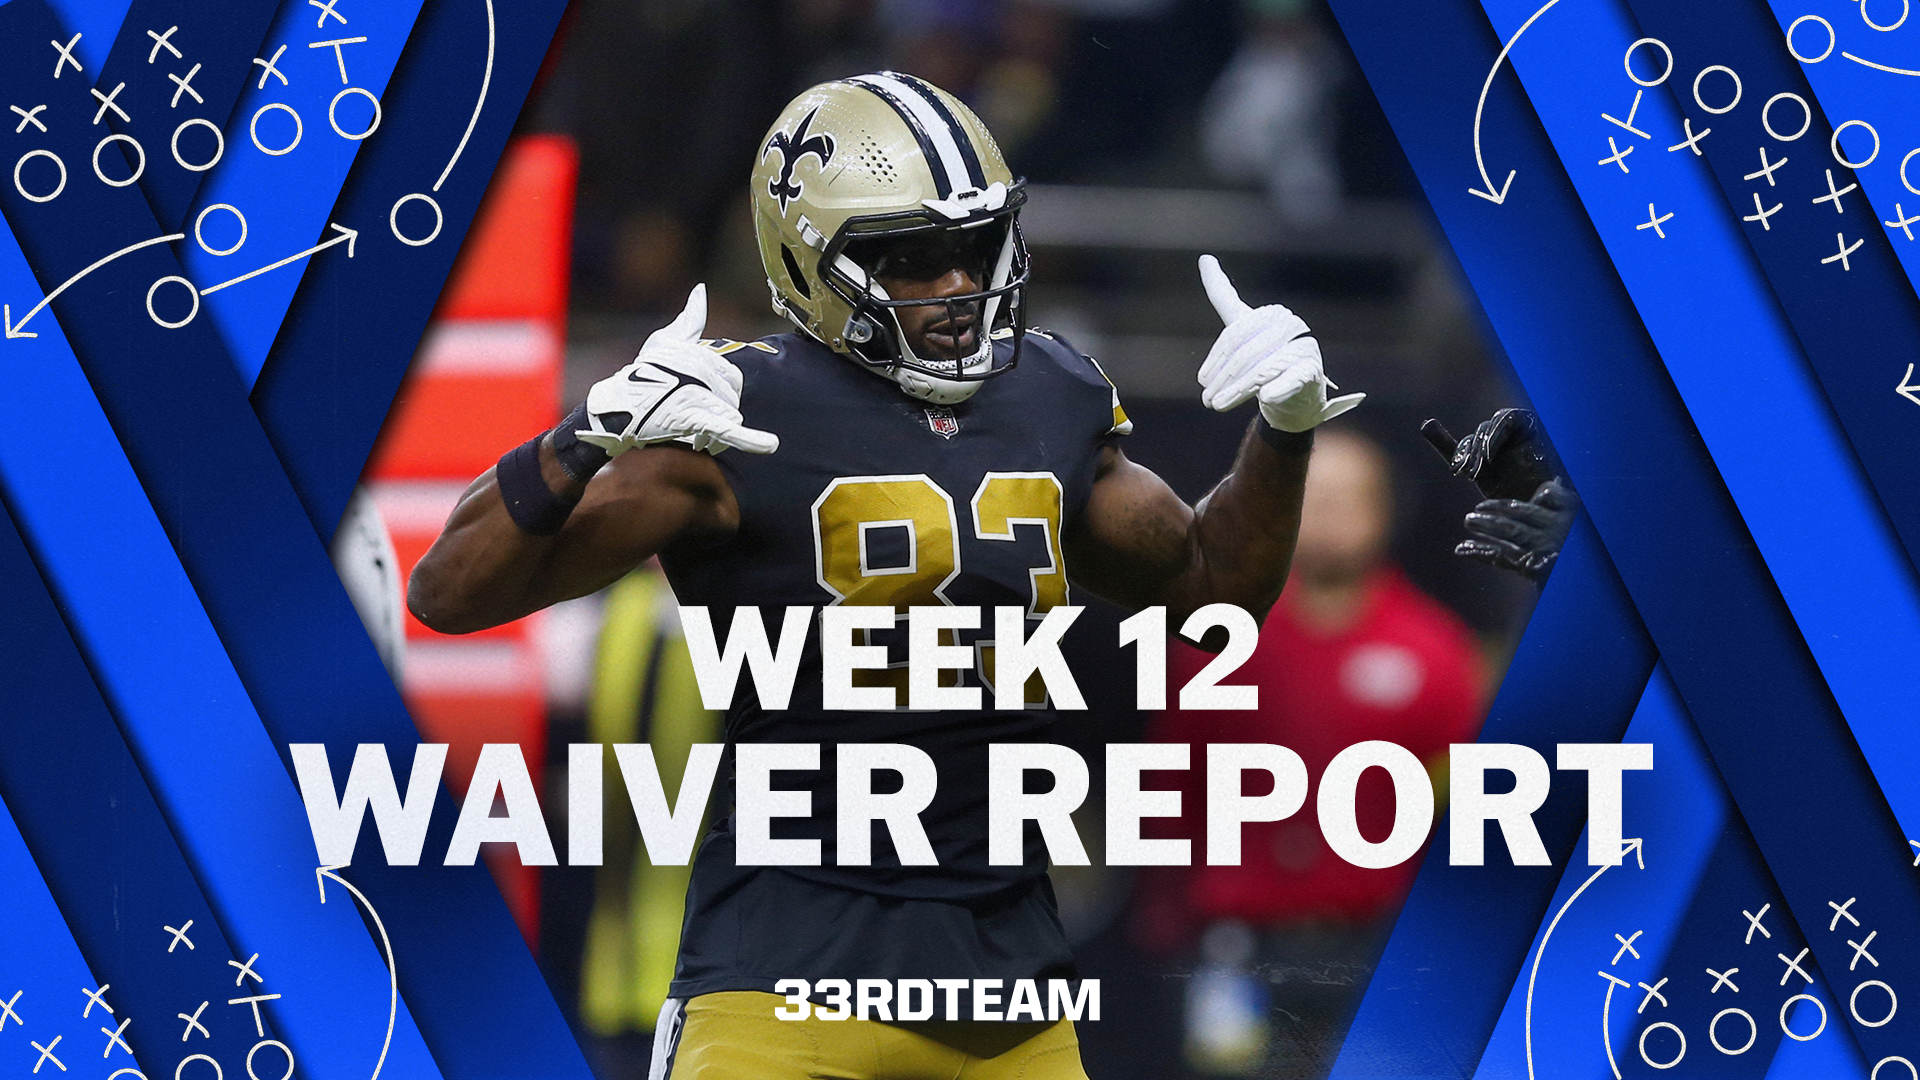 Fantasy Football Week 12: Waiver Wire Adds, Drops and More